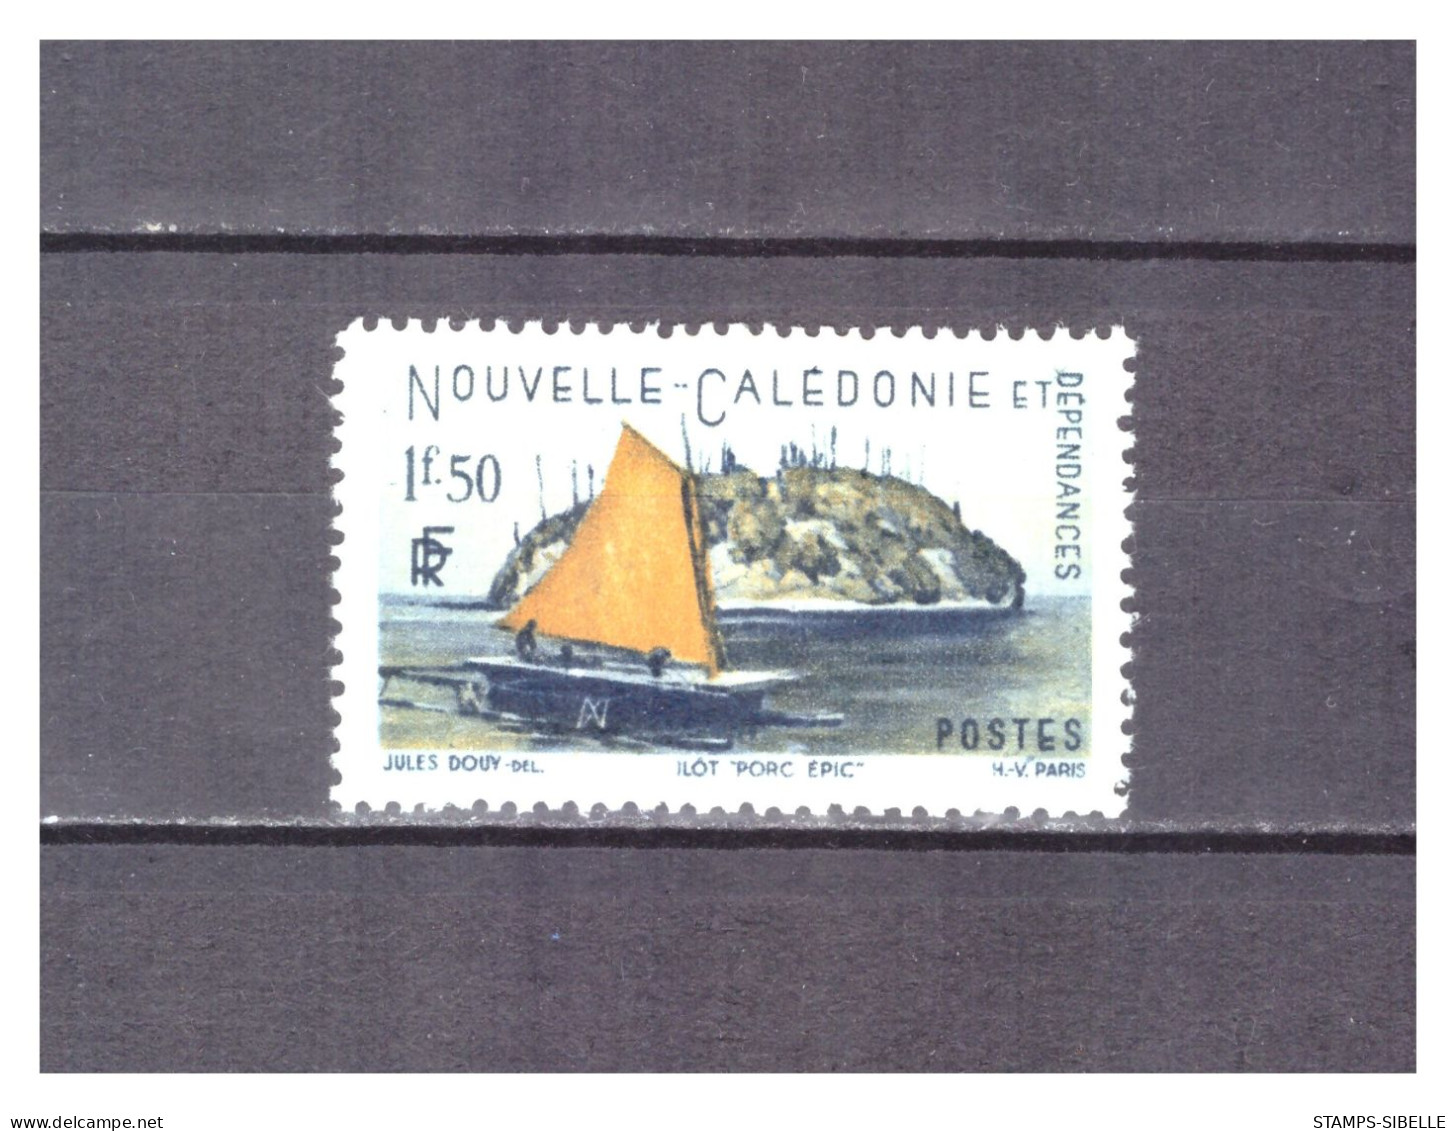 NOUVELLE  CALEDONIE . N ° 267 .  1 F 50     .  NEUF    * . SUPERBE . - Neufs